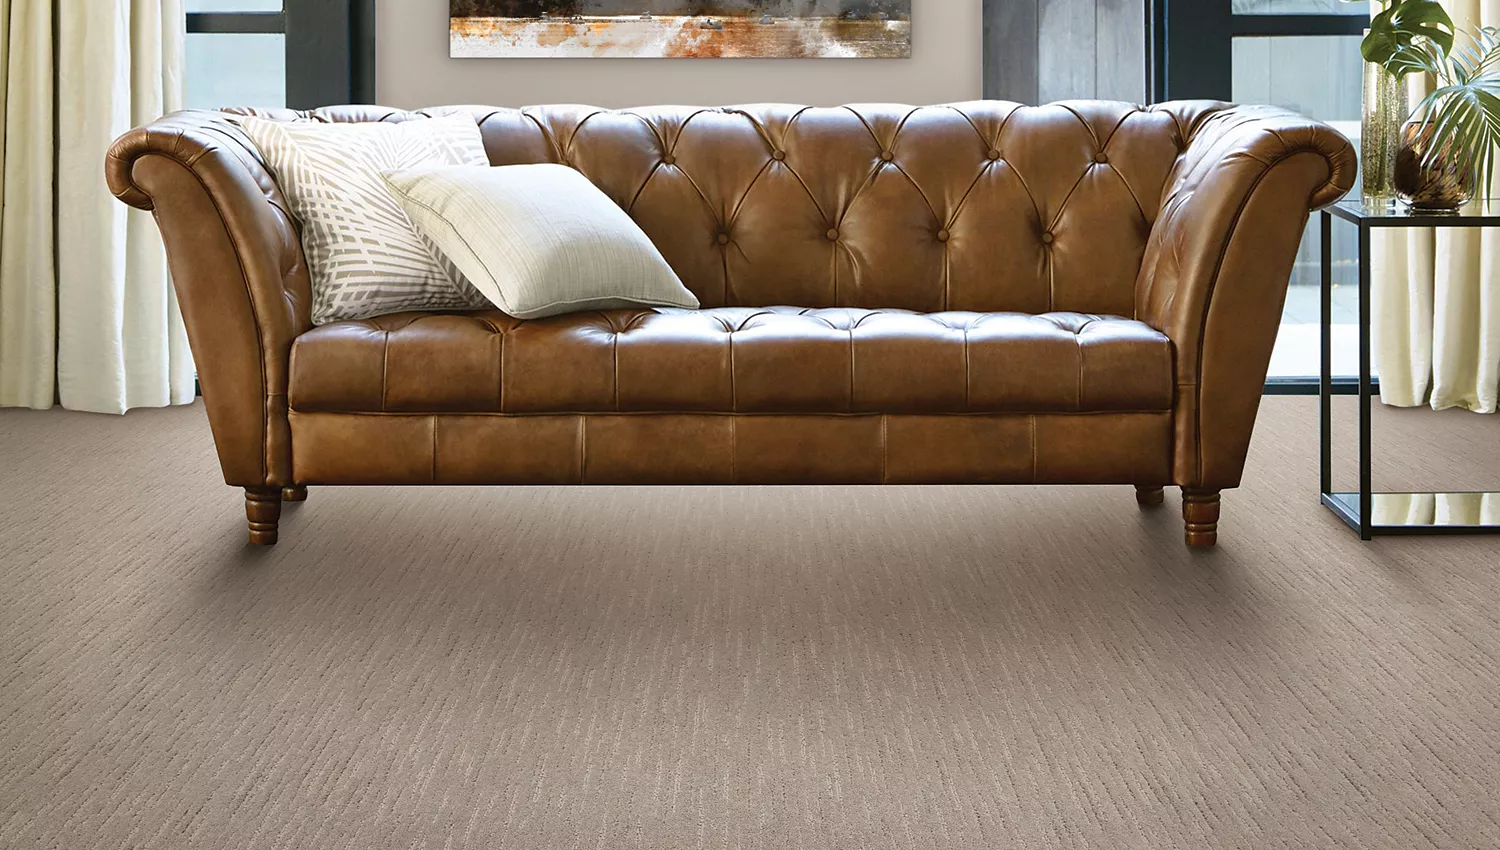 Tufted Leather couch on light grey carpet